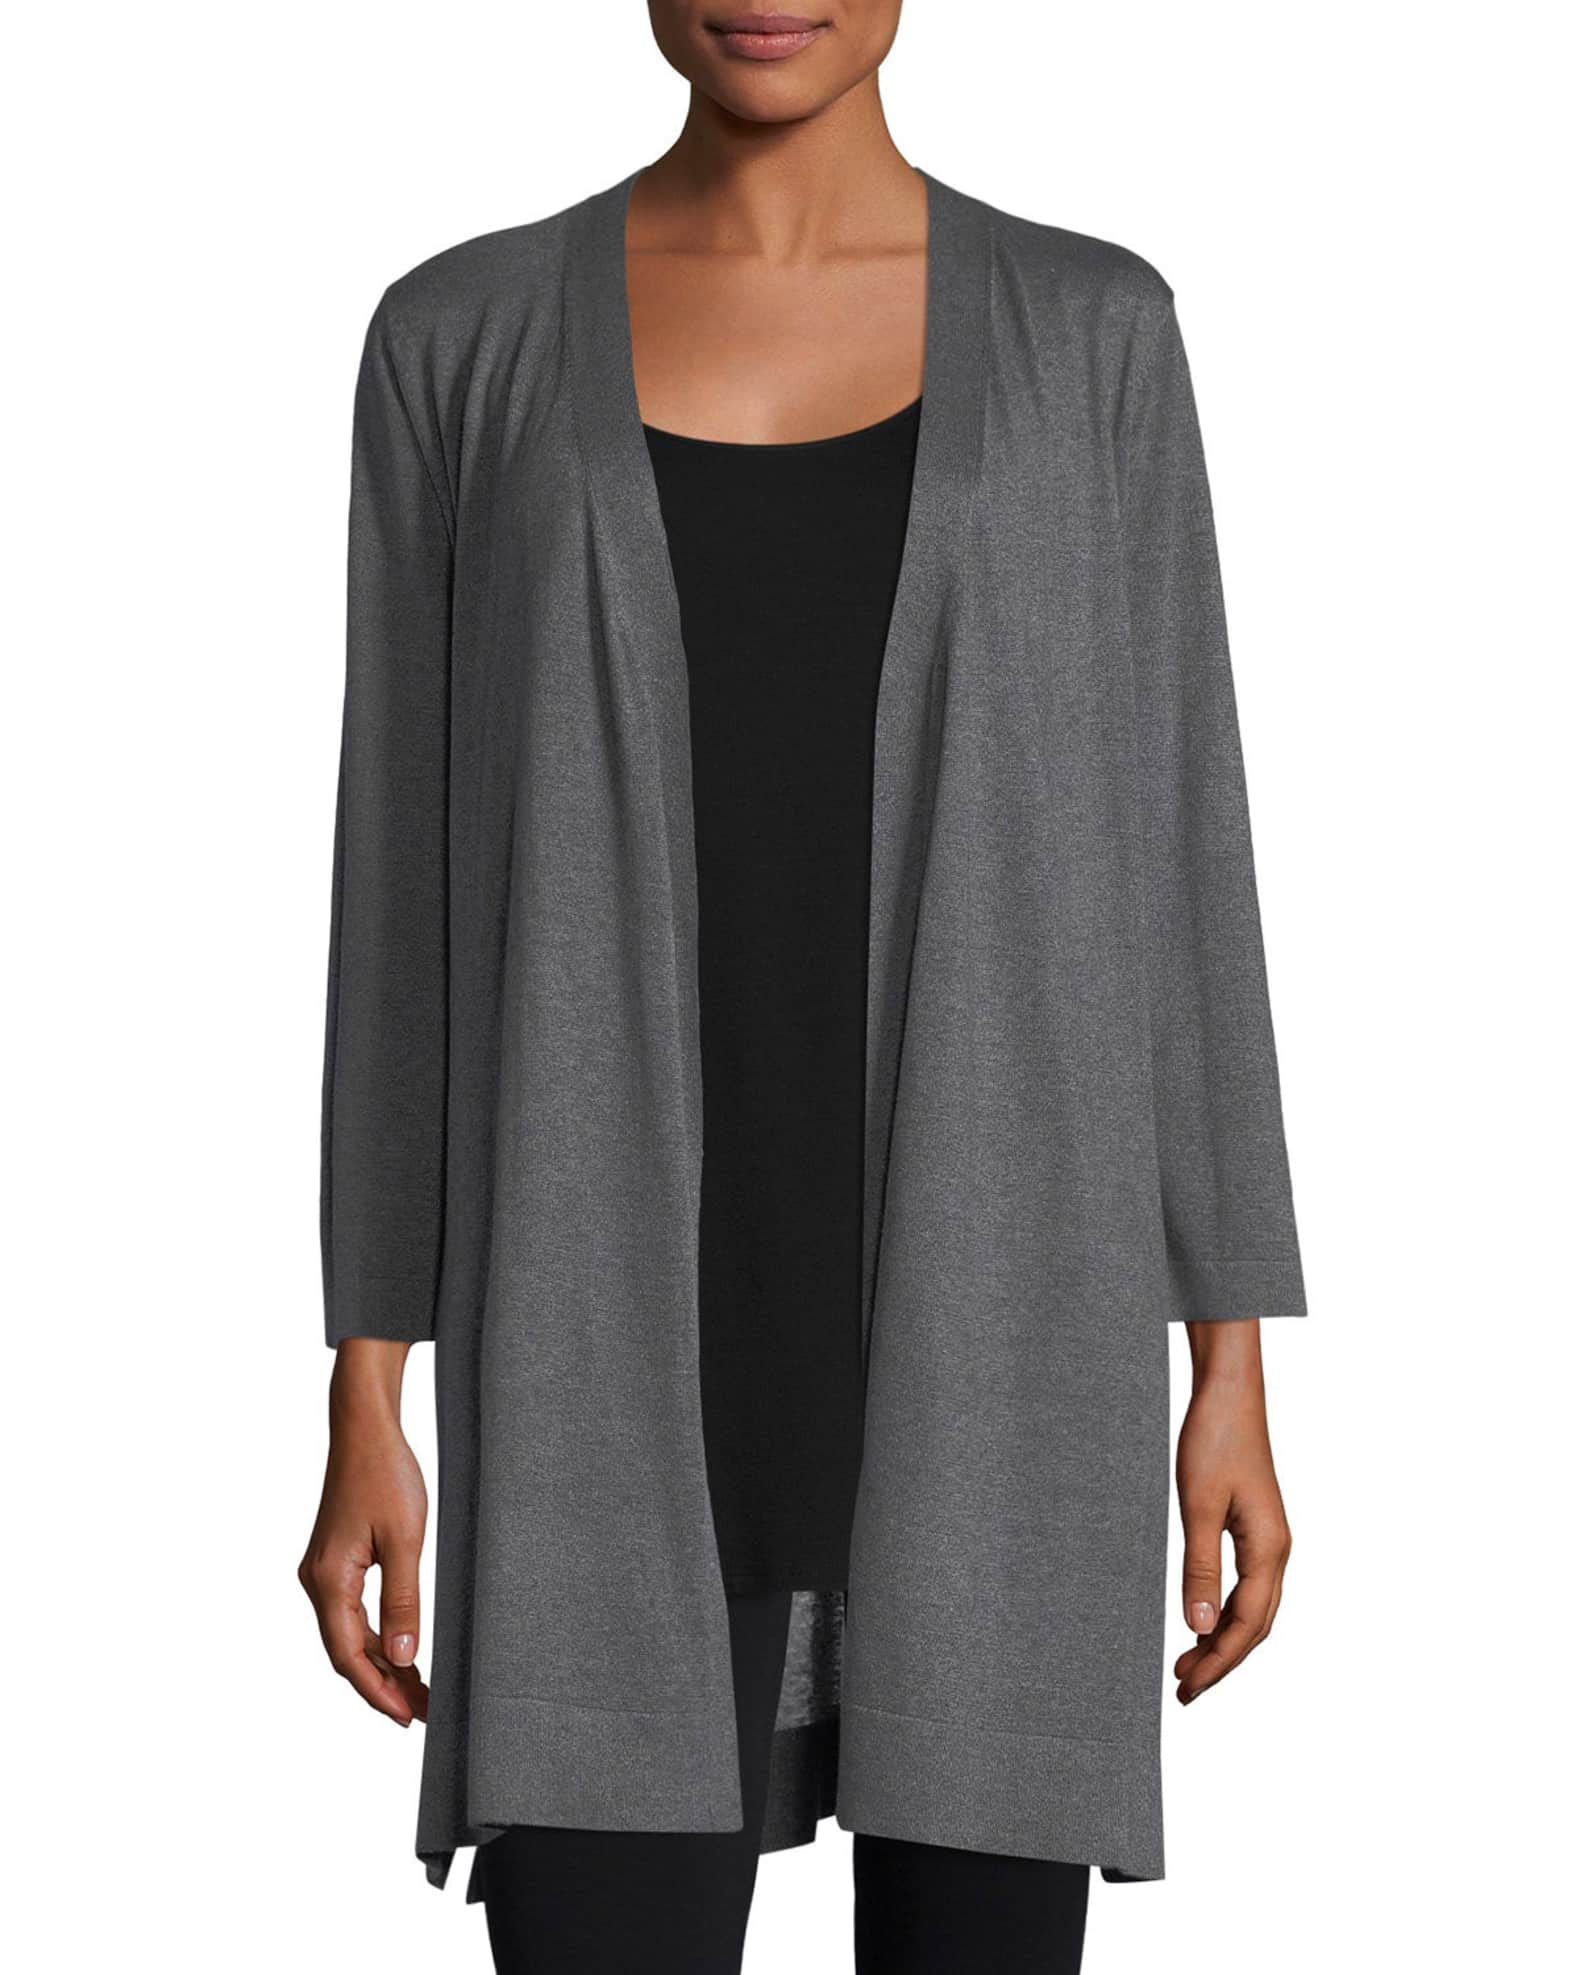 Unity Lean Decent Eileen Fisher Belted Simple Cardigan | Neiman Marcus